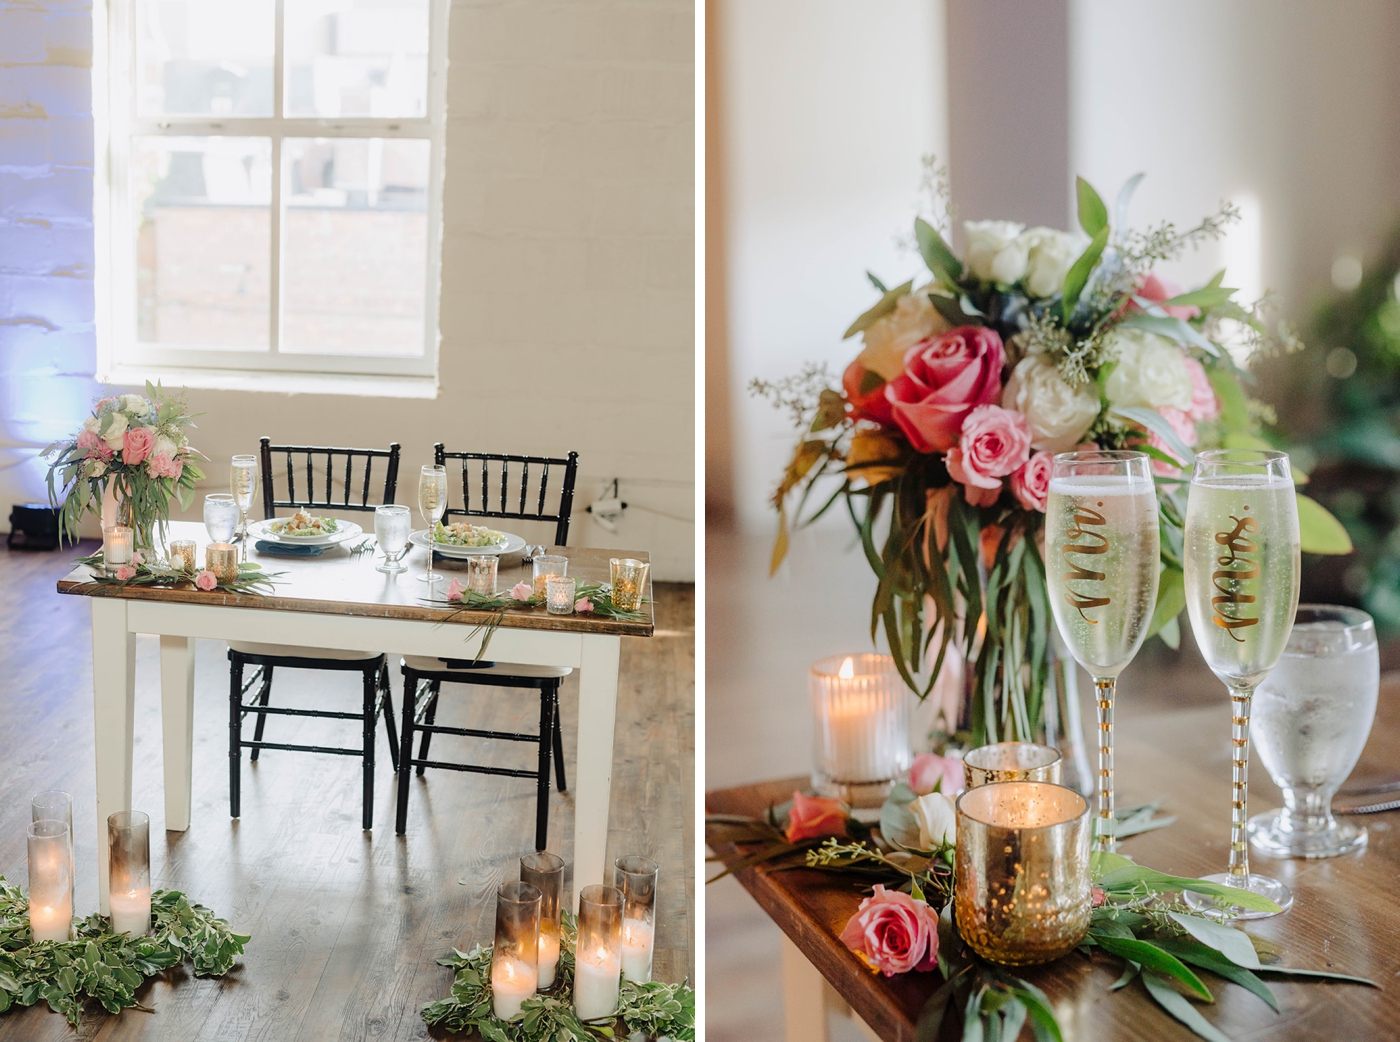 Floating candles, cafe lights, and greenery at an industrial-chic wedding reception